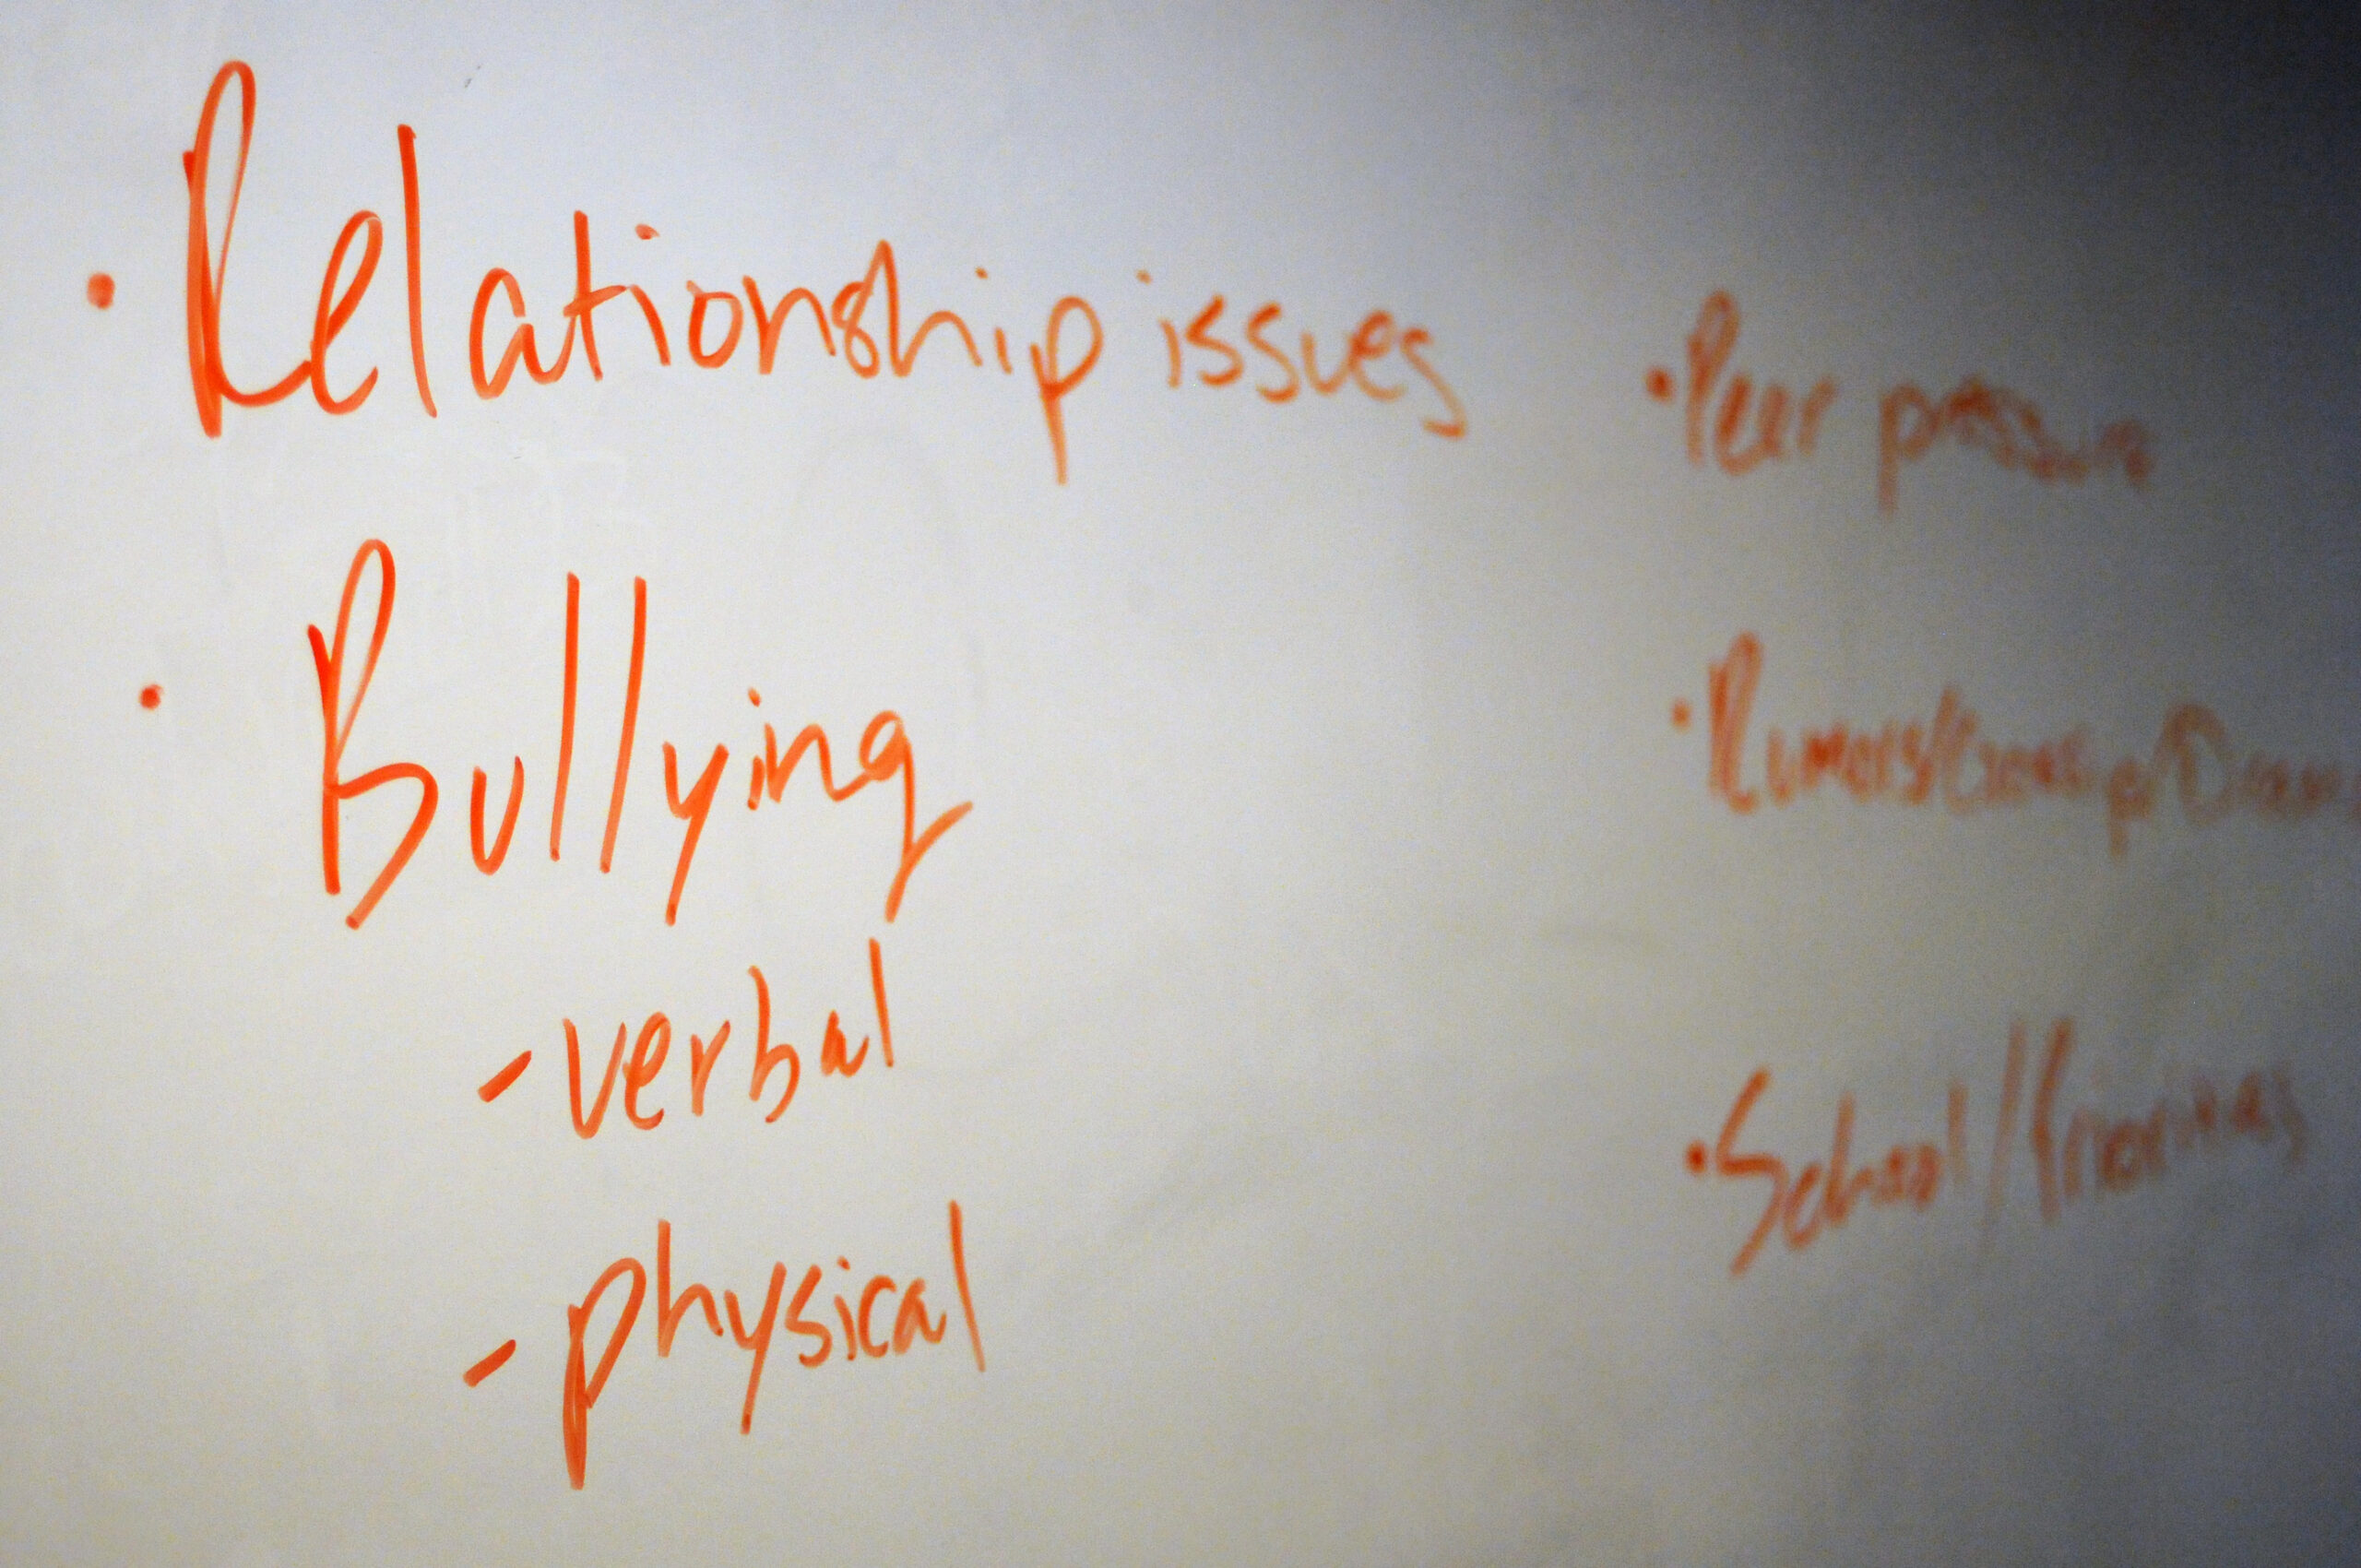 white board shows key words educating students about mental health